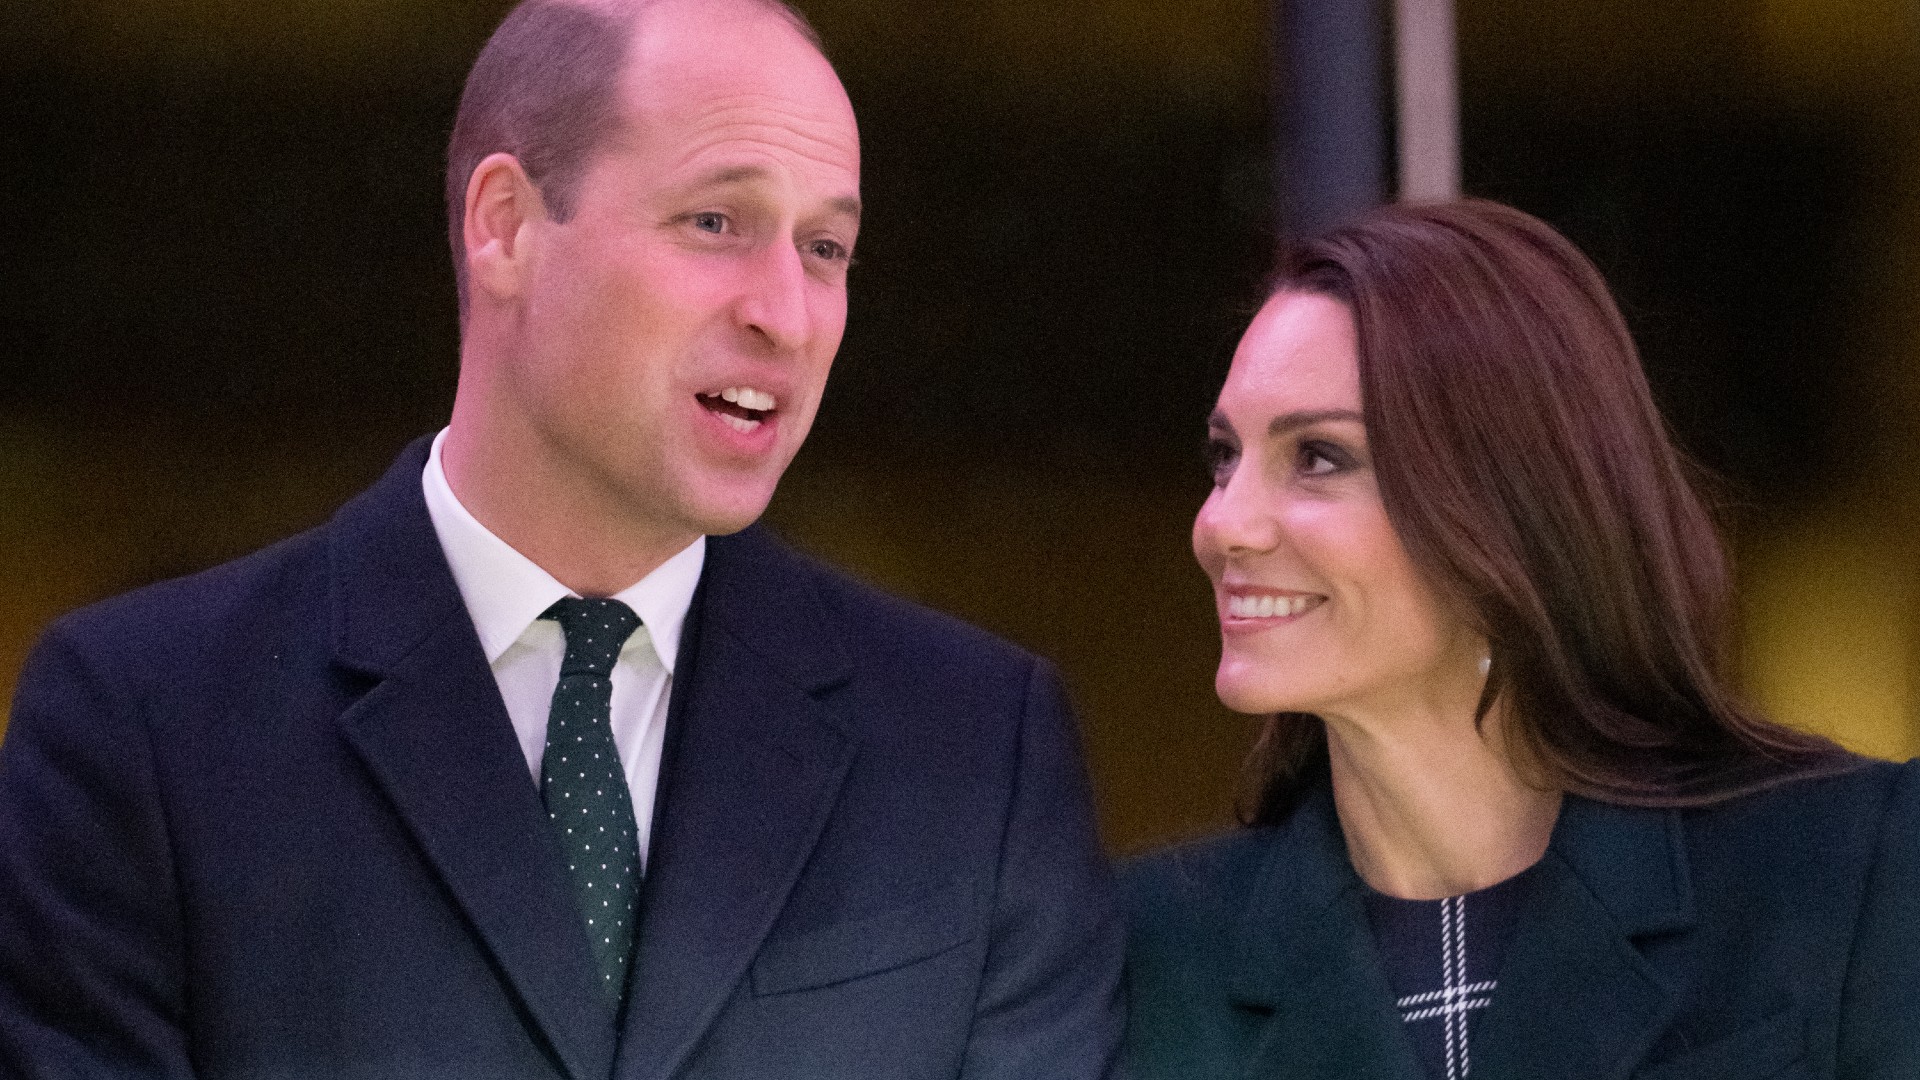 After Three Days in the U.S., Prince William and Kate Middleton Spend Saturday Night in the Most Relatable Way